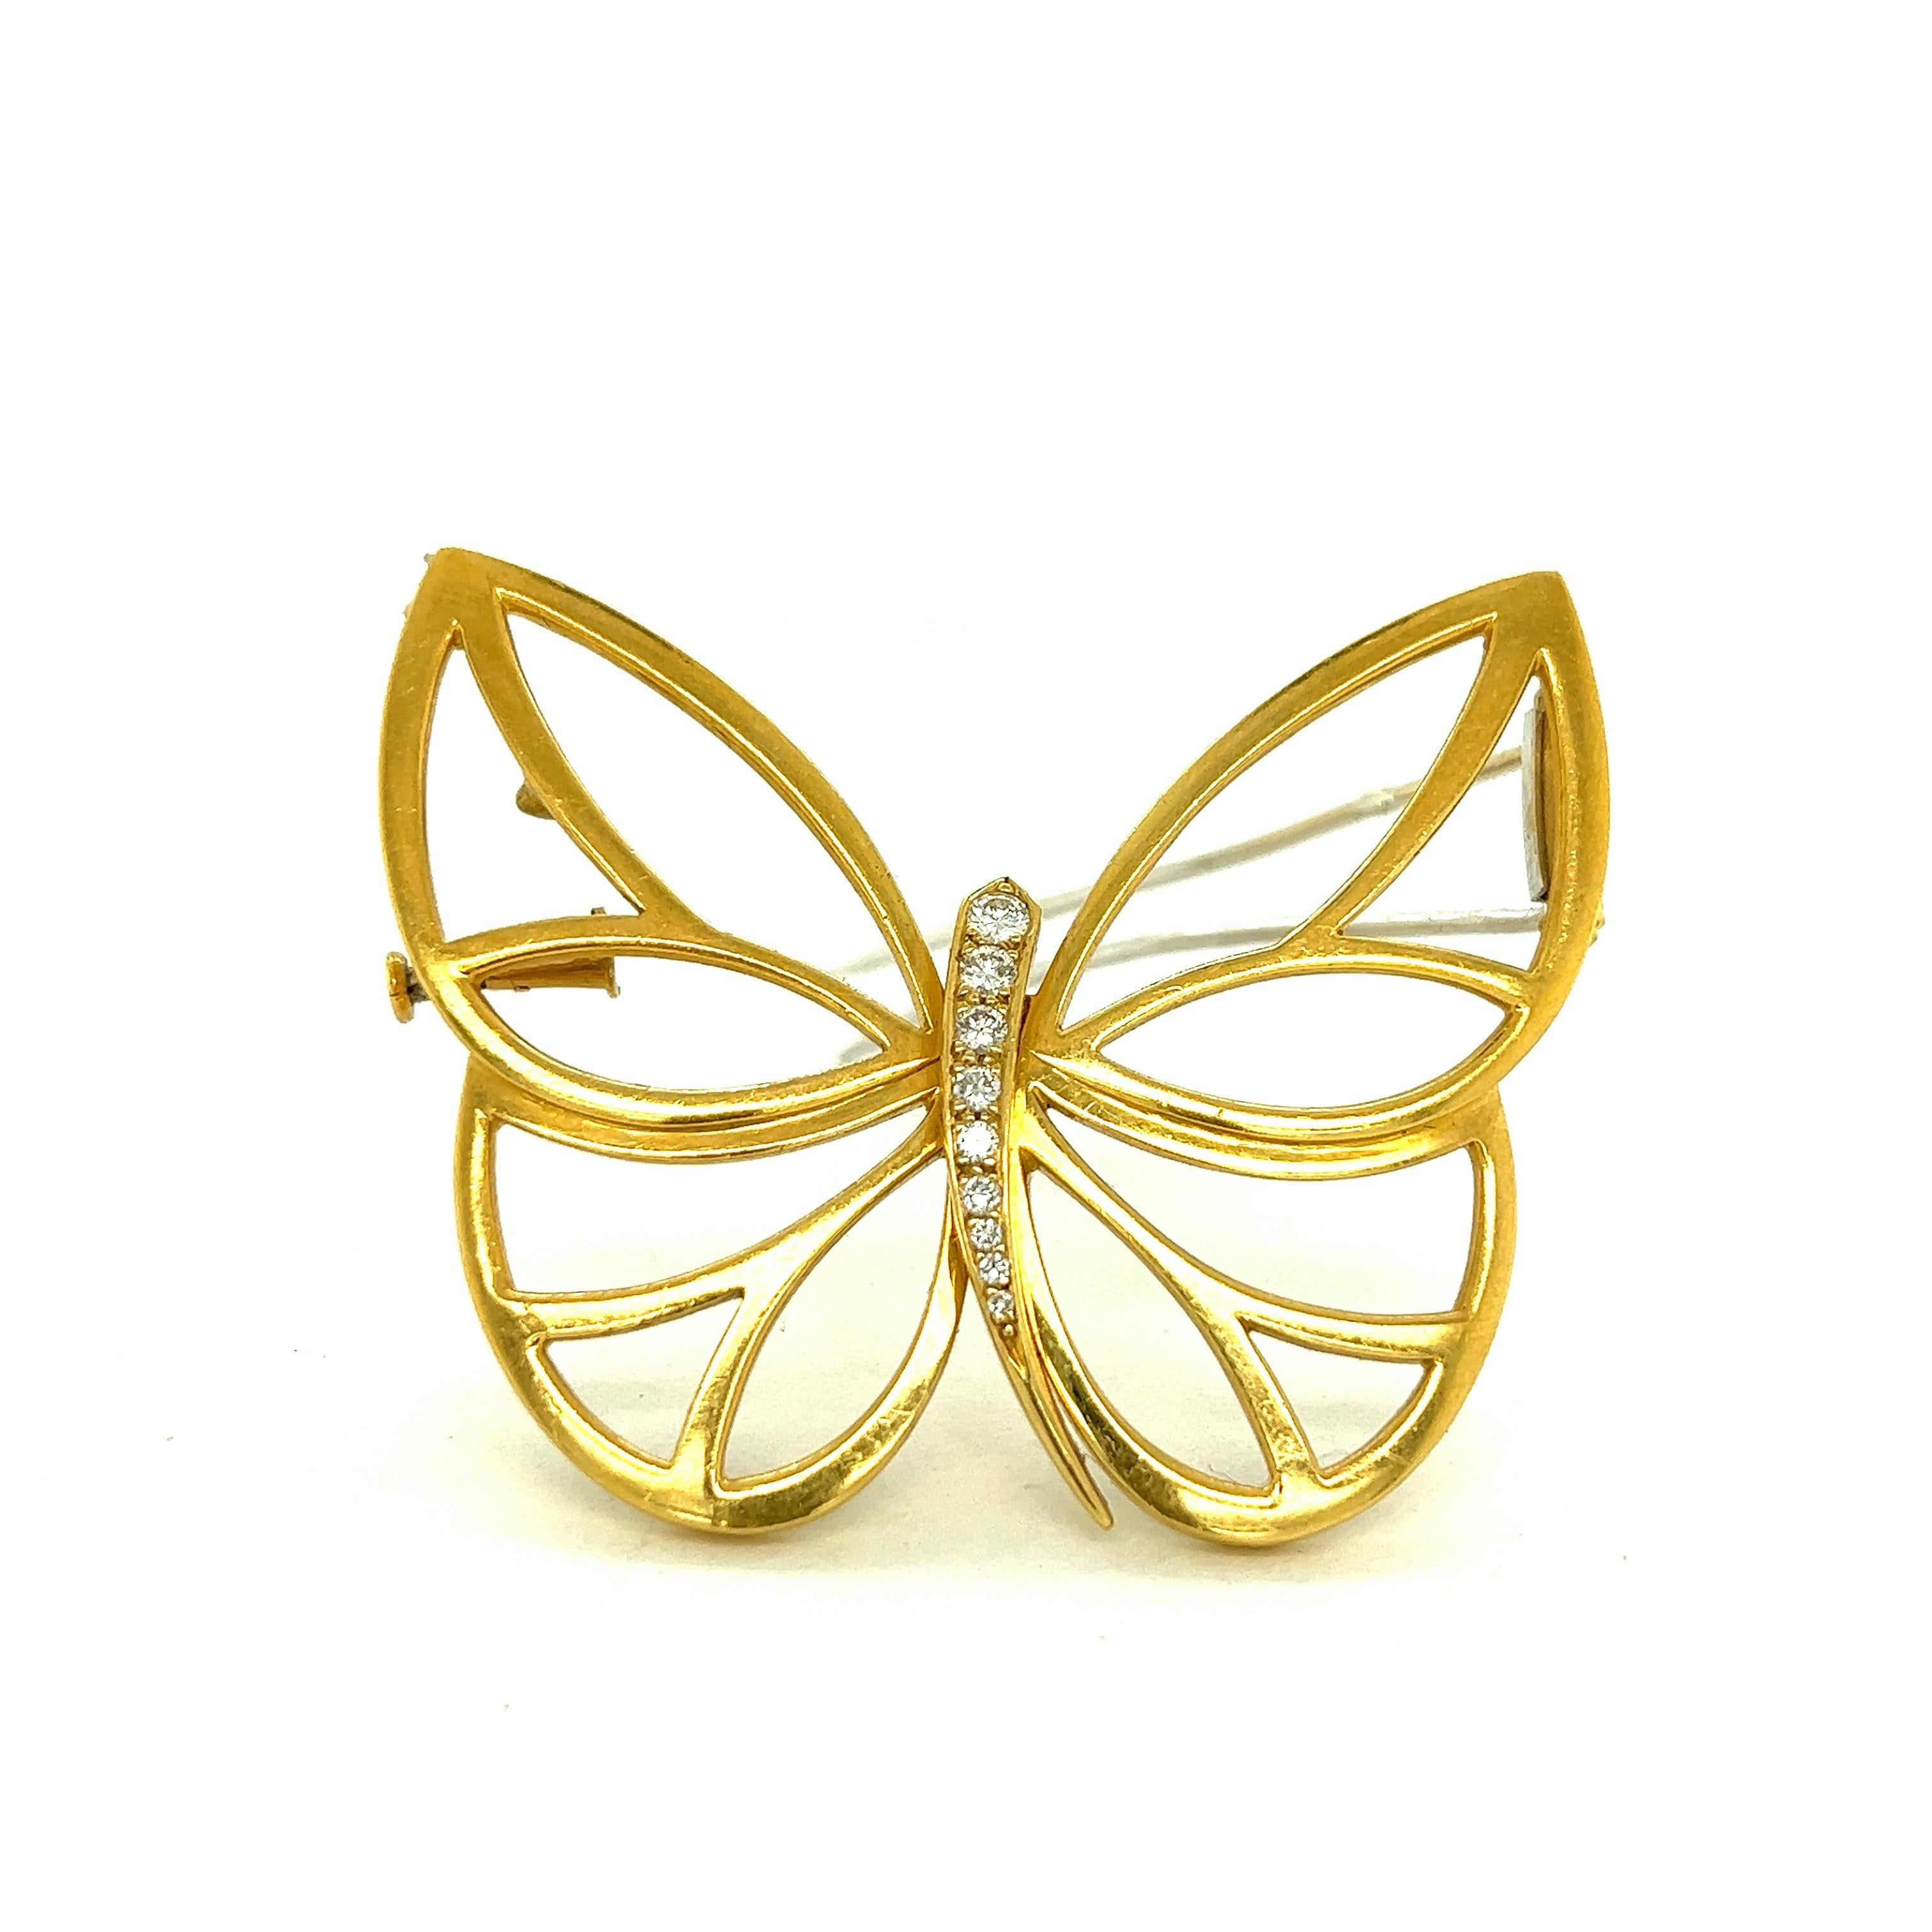 Van Cleef & Arpels Papillon 18k Yellow Gold Diamond Butterfly Brooch

An openwork butterfly design with round brilliant-cut diamonds of approximately 0.30 carat total, made of 18 karat yellow gold; marked VCA, 750, CL10527, French assay marks

Size: